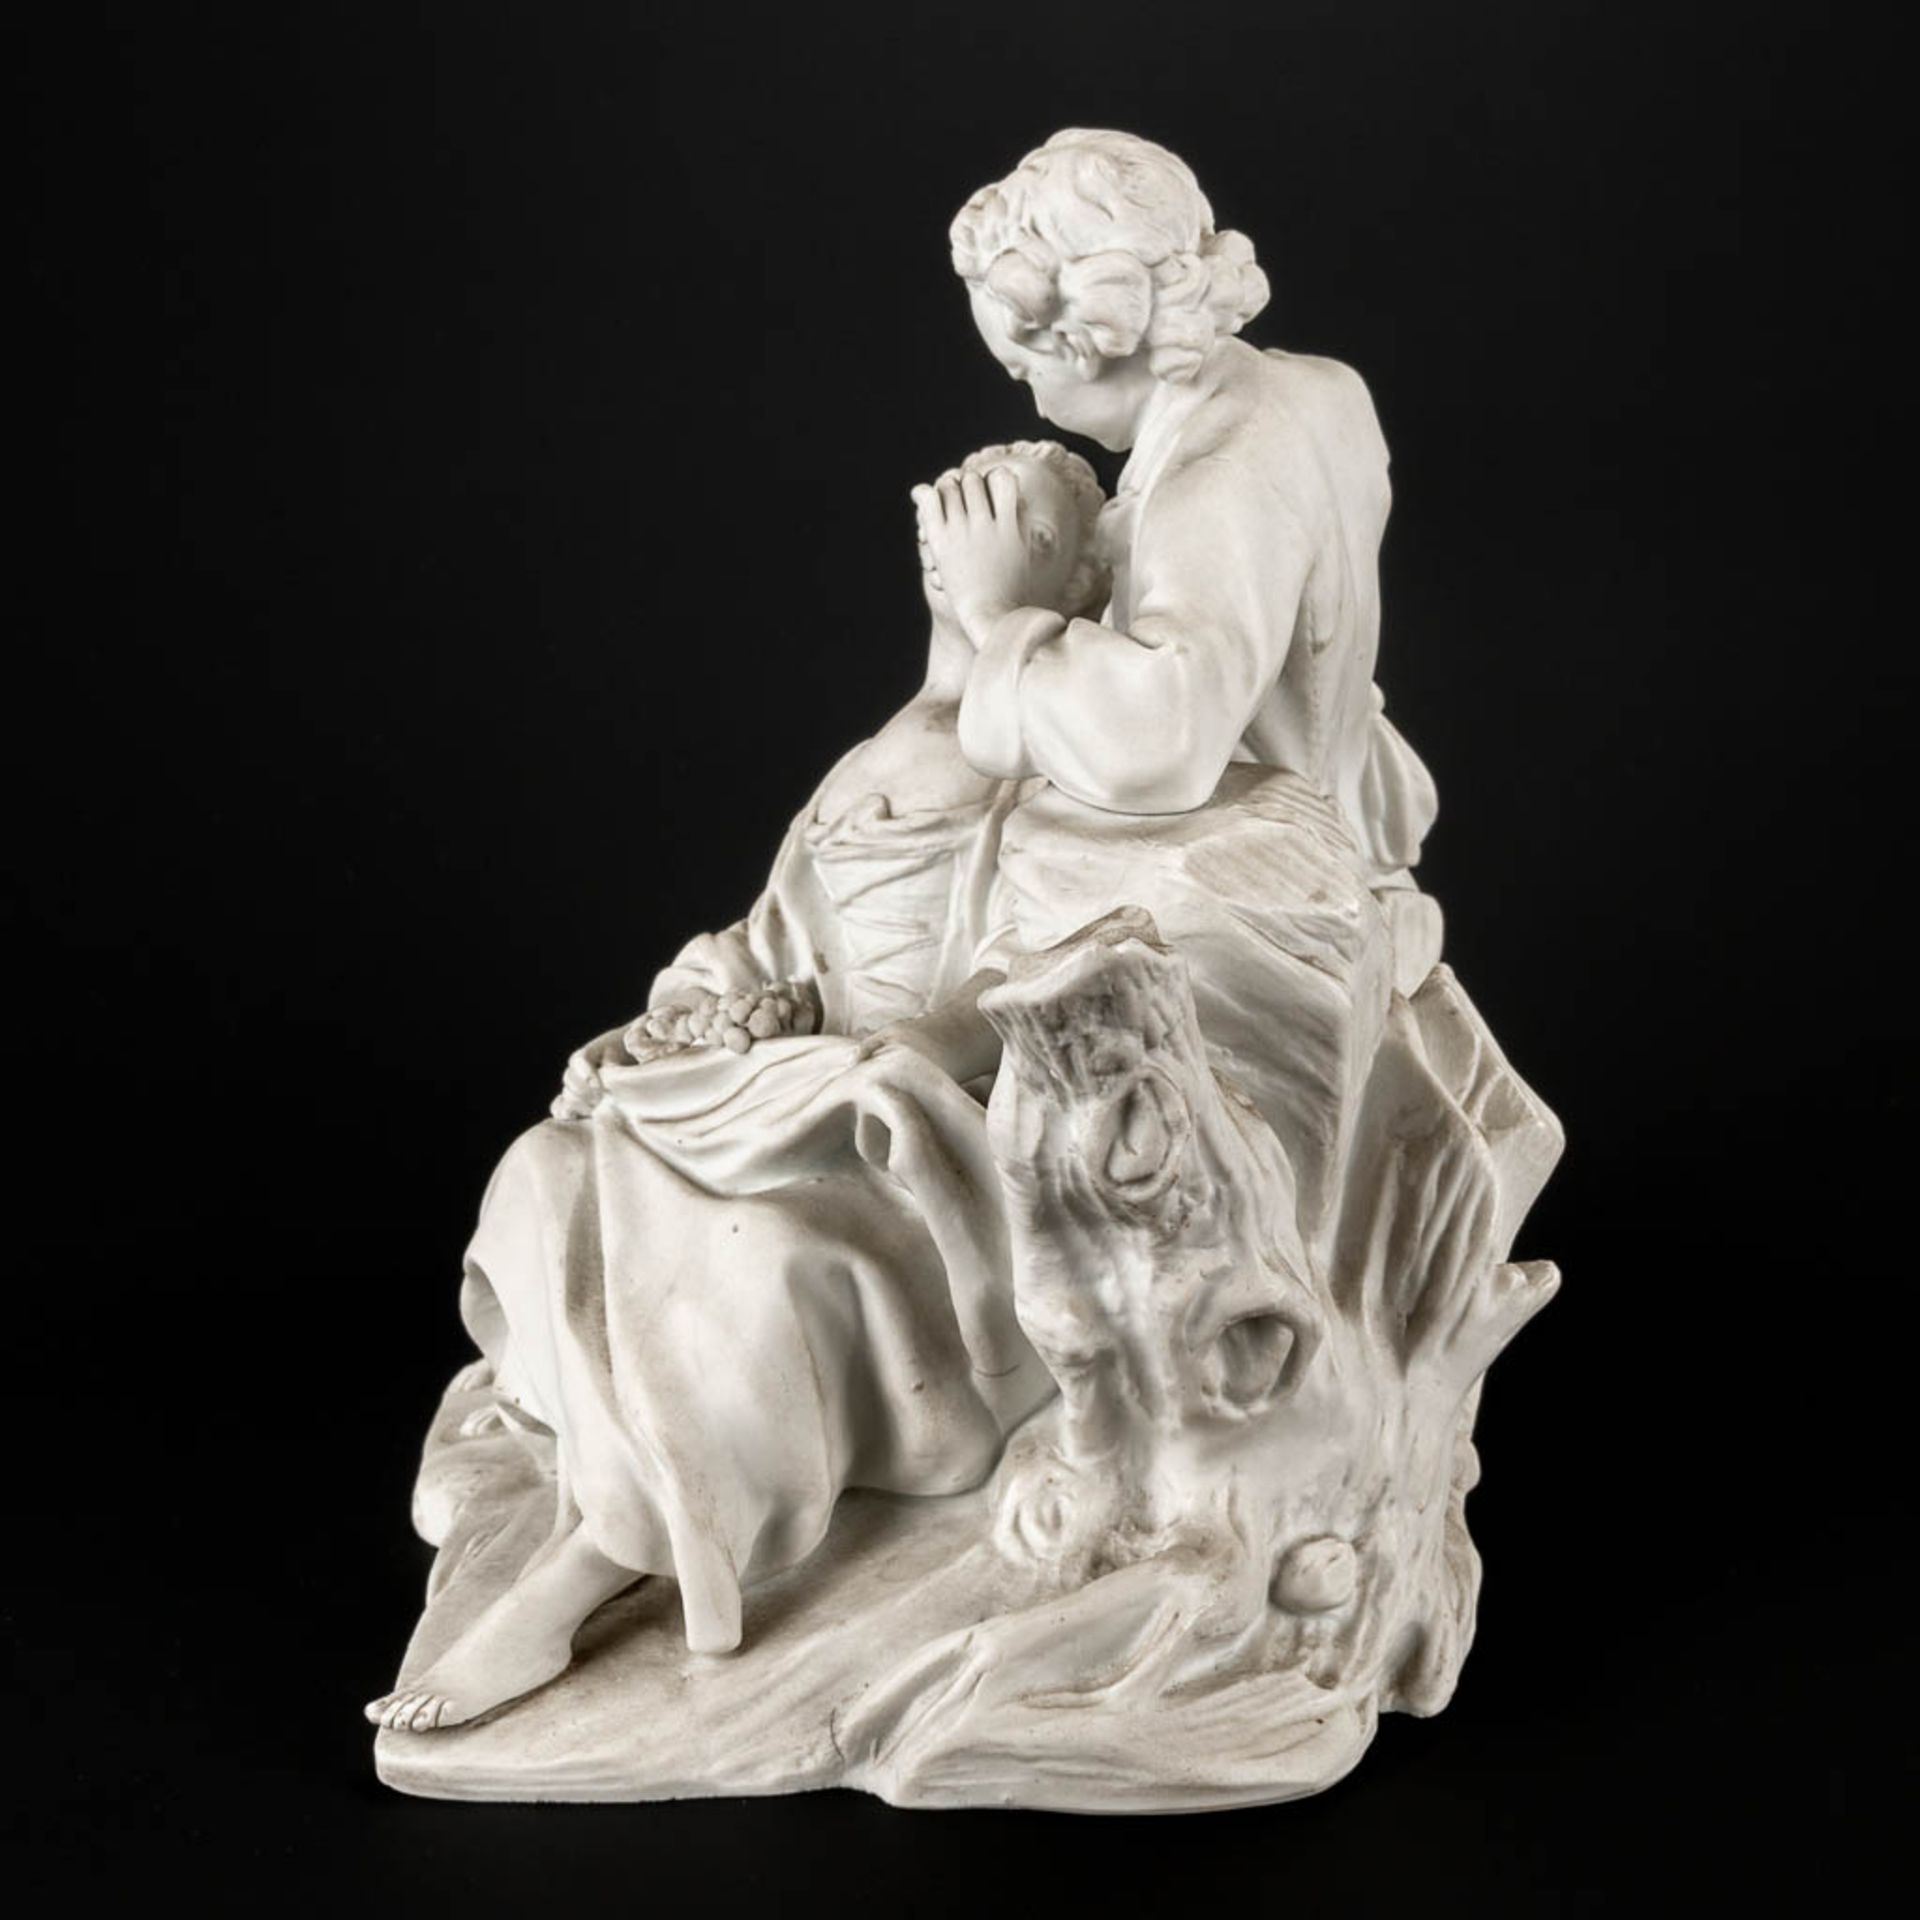 A romantic scene made of biscuit porcelain and marked Sevres. 19th century. (17 x 23 x 22 cm) - Image 3 of 20